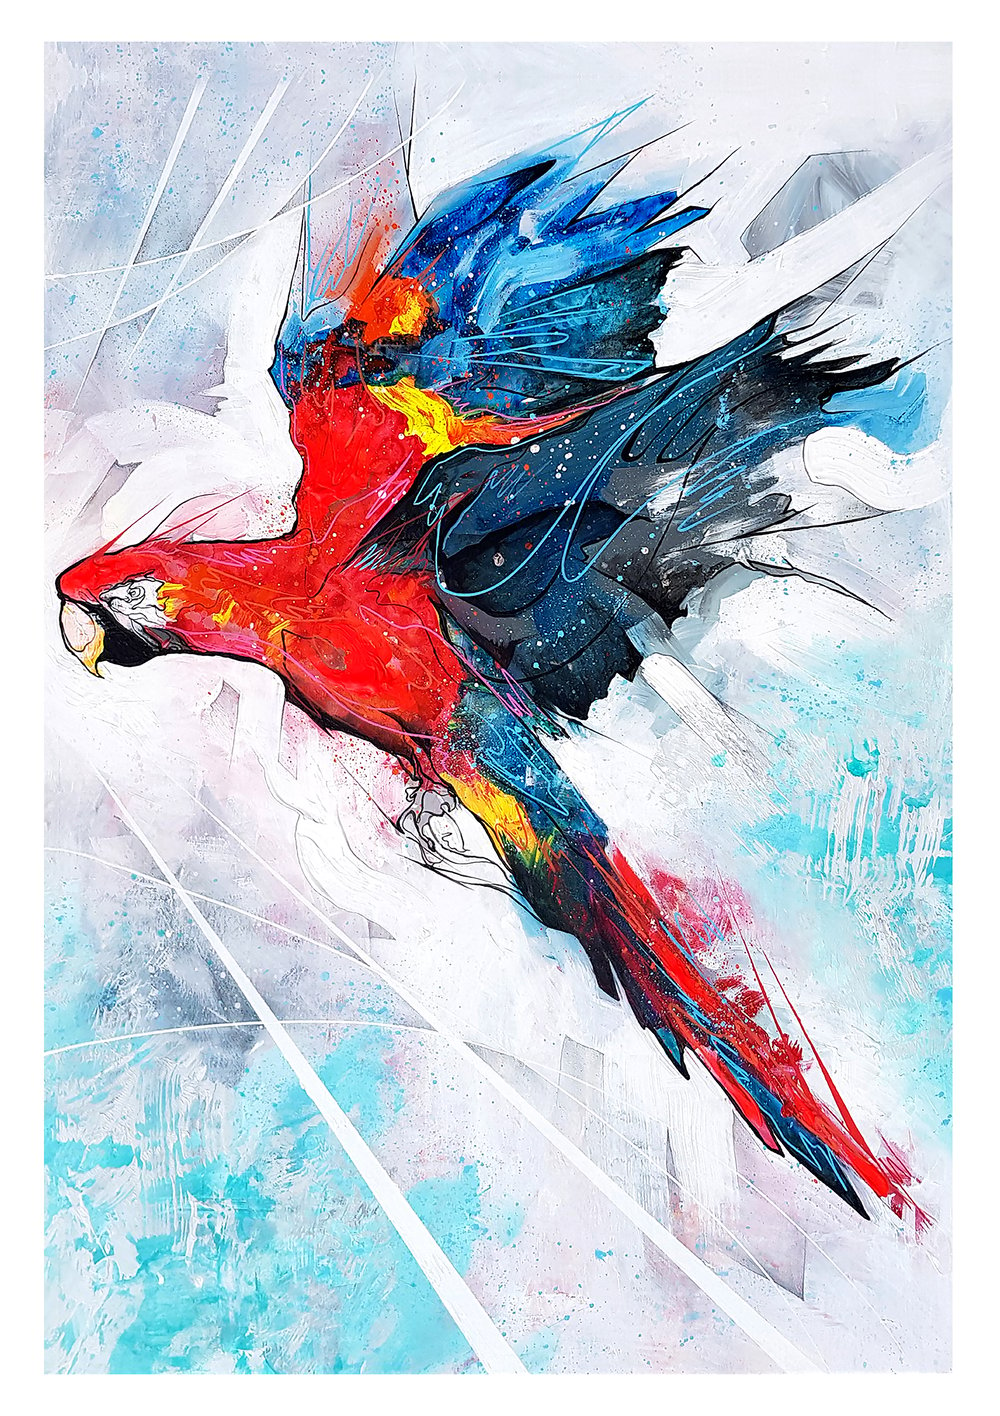 Macaw In Flight - SIGNED OPEN EDITION PRINT - FREE WORLDWIDE SHIPPING!!!